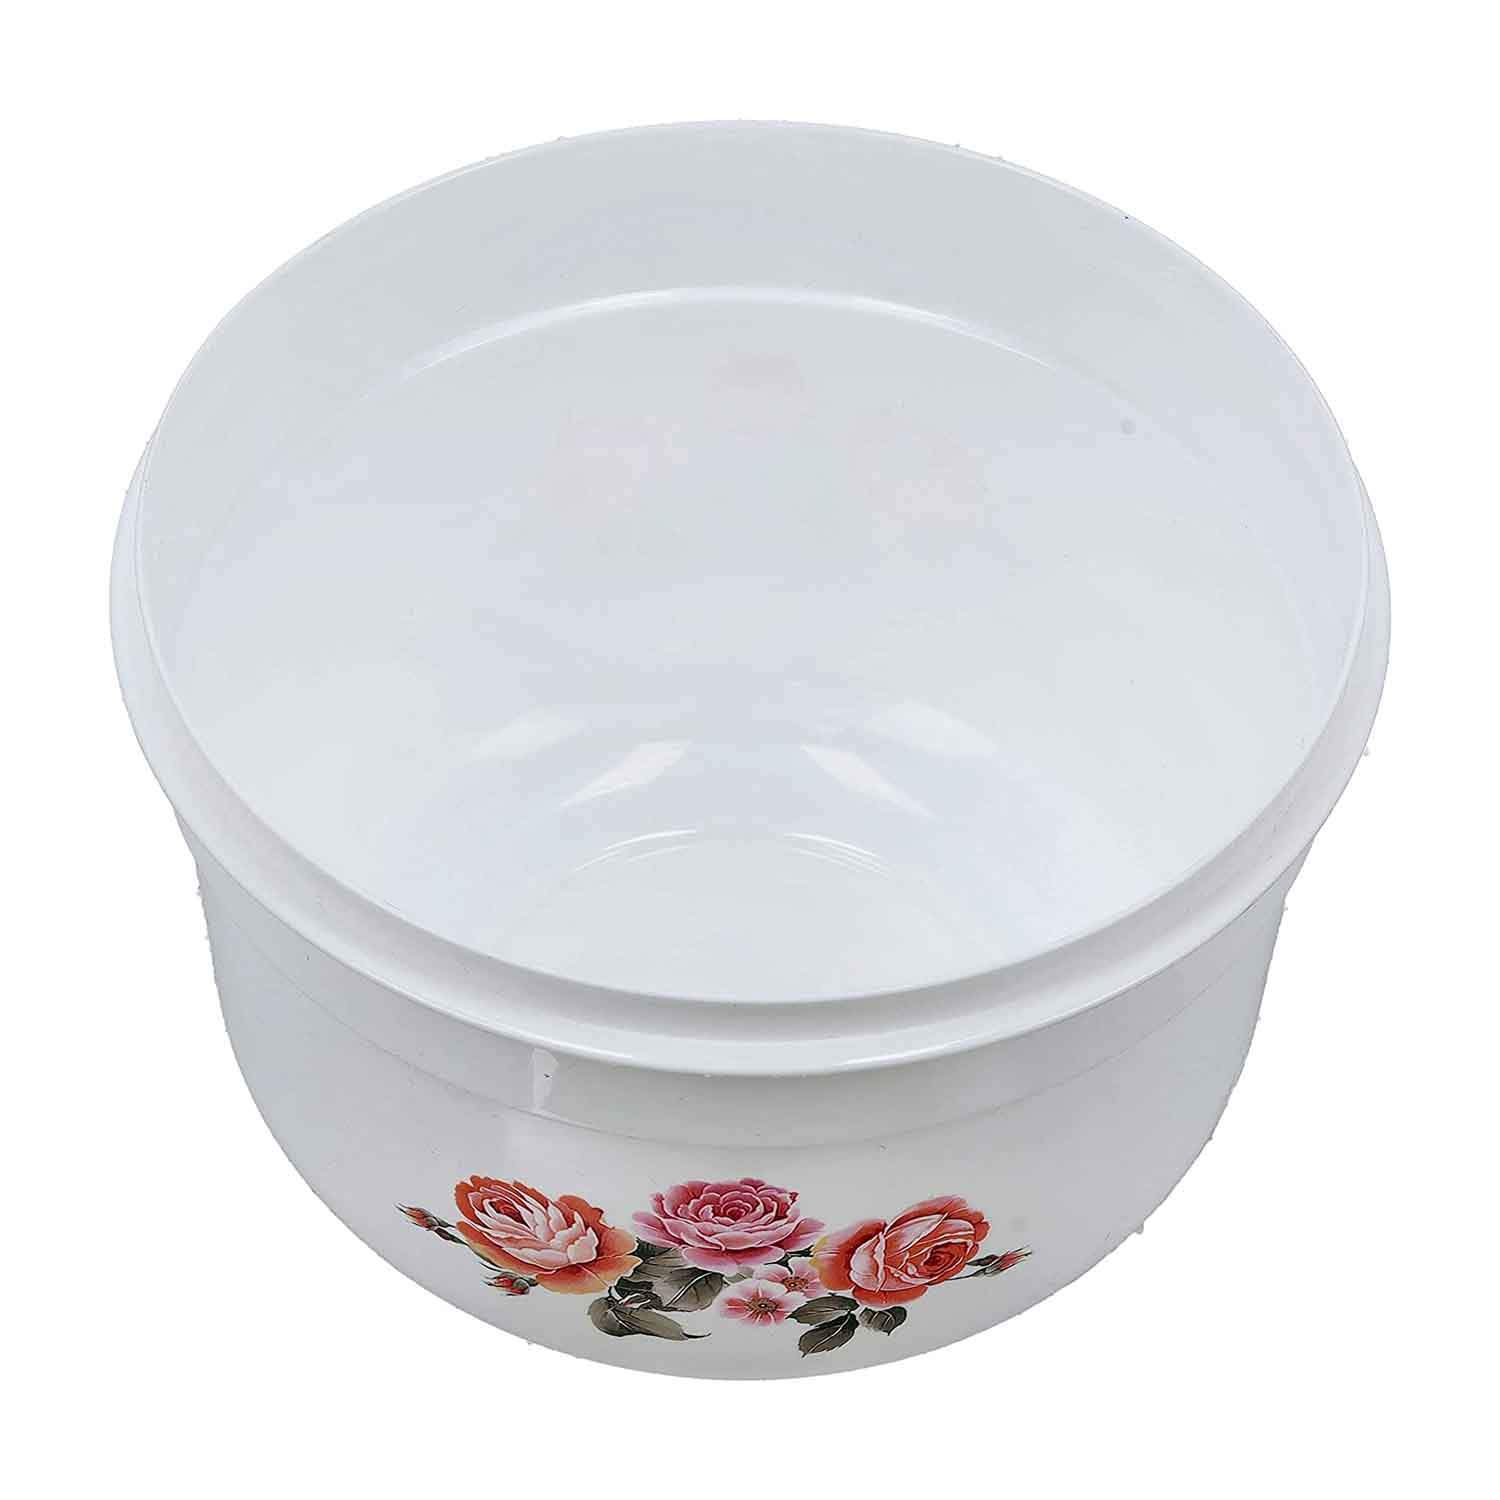 Royalford Round Storage Bowl, 3L Plastic Food Container, Rf10870 | Air-Tight Lid Bpa-Free Box | Suitable For Dishwasher, Freezer | Meal Prep Storage Tubs